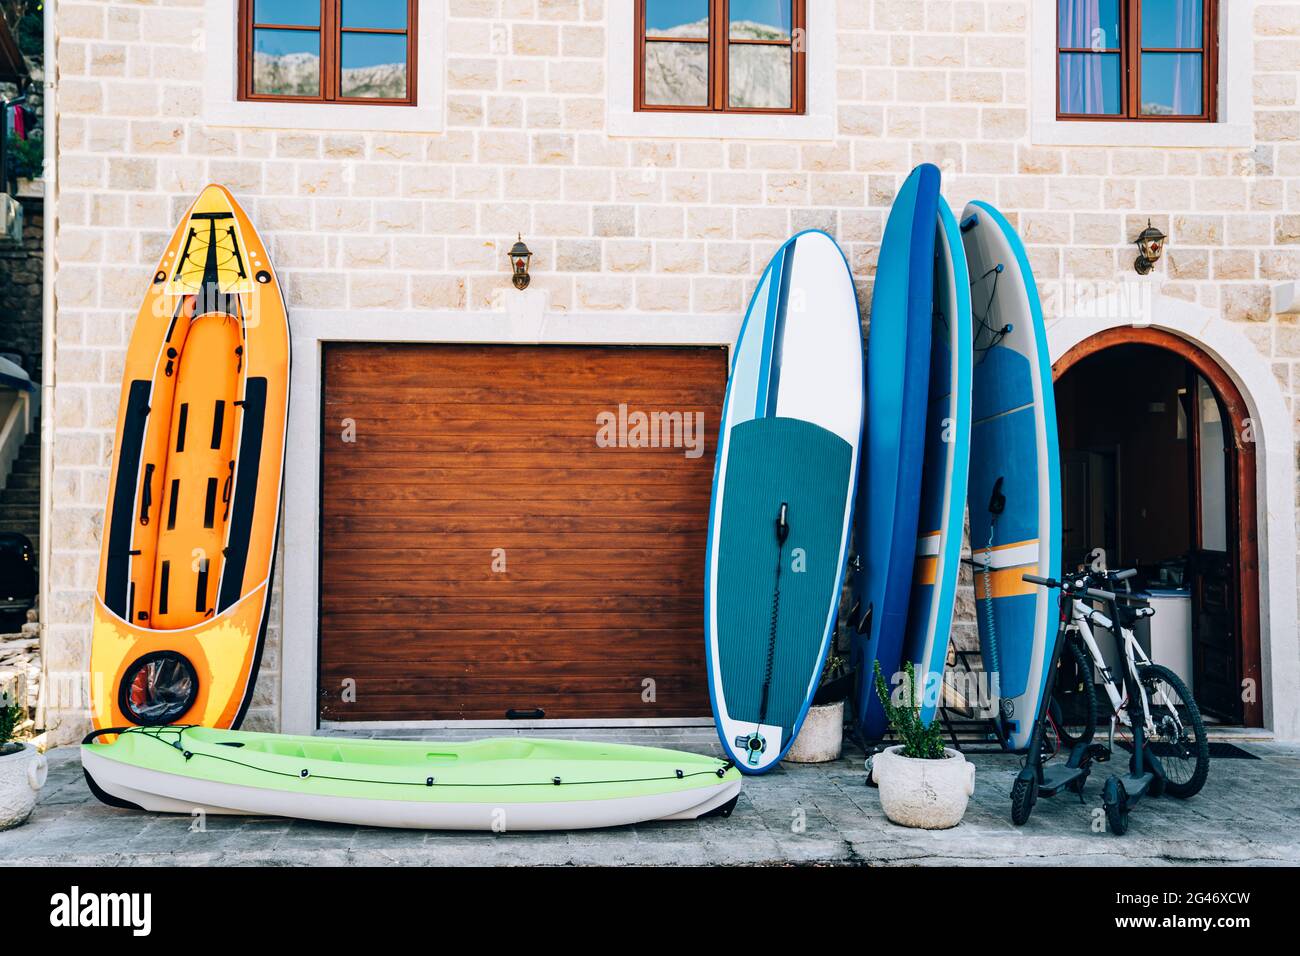 Sports travel equipment rental store - rubber boats, inflatable canoes and kayaks, gliding boards, bicycles and electric scooter Stock Photo